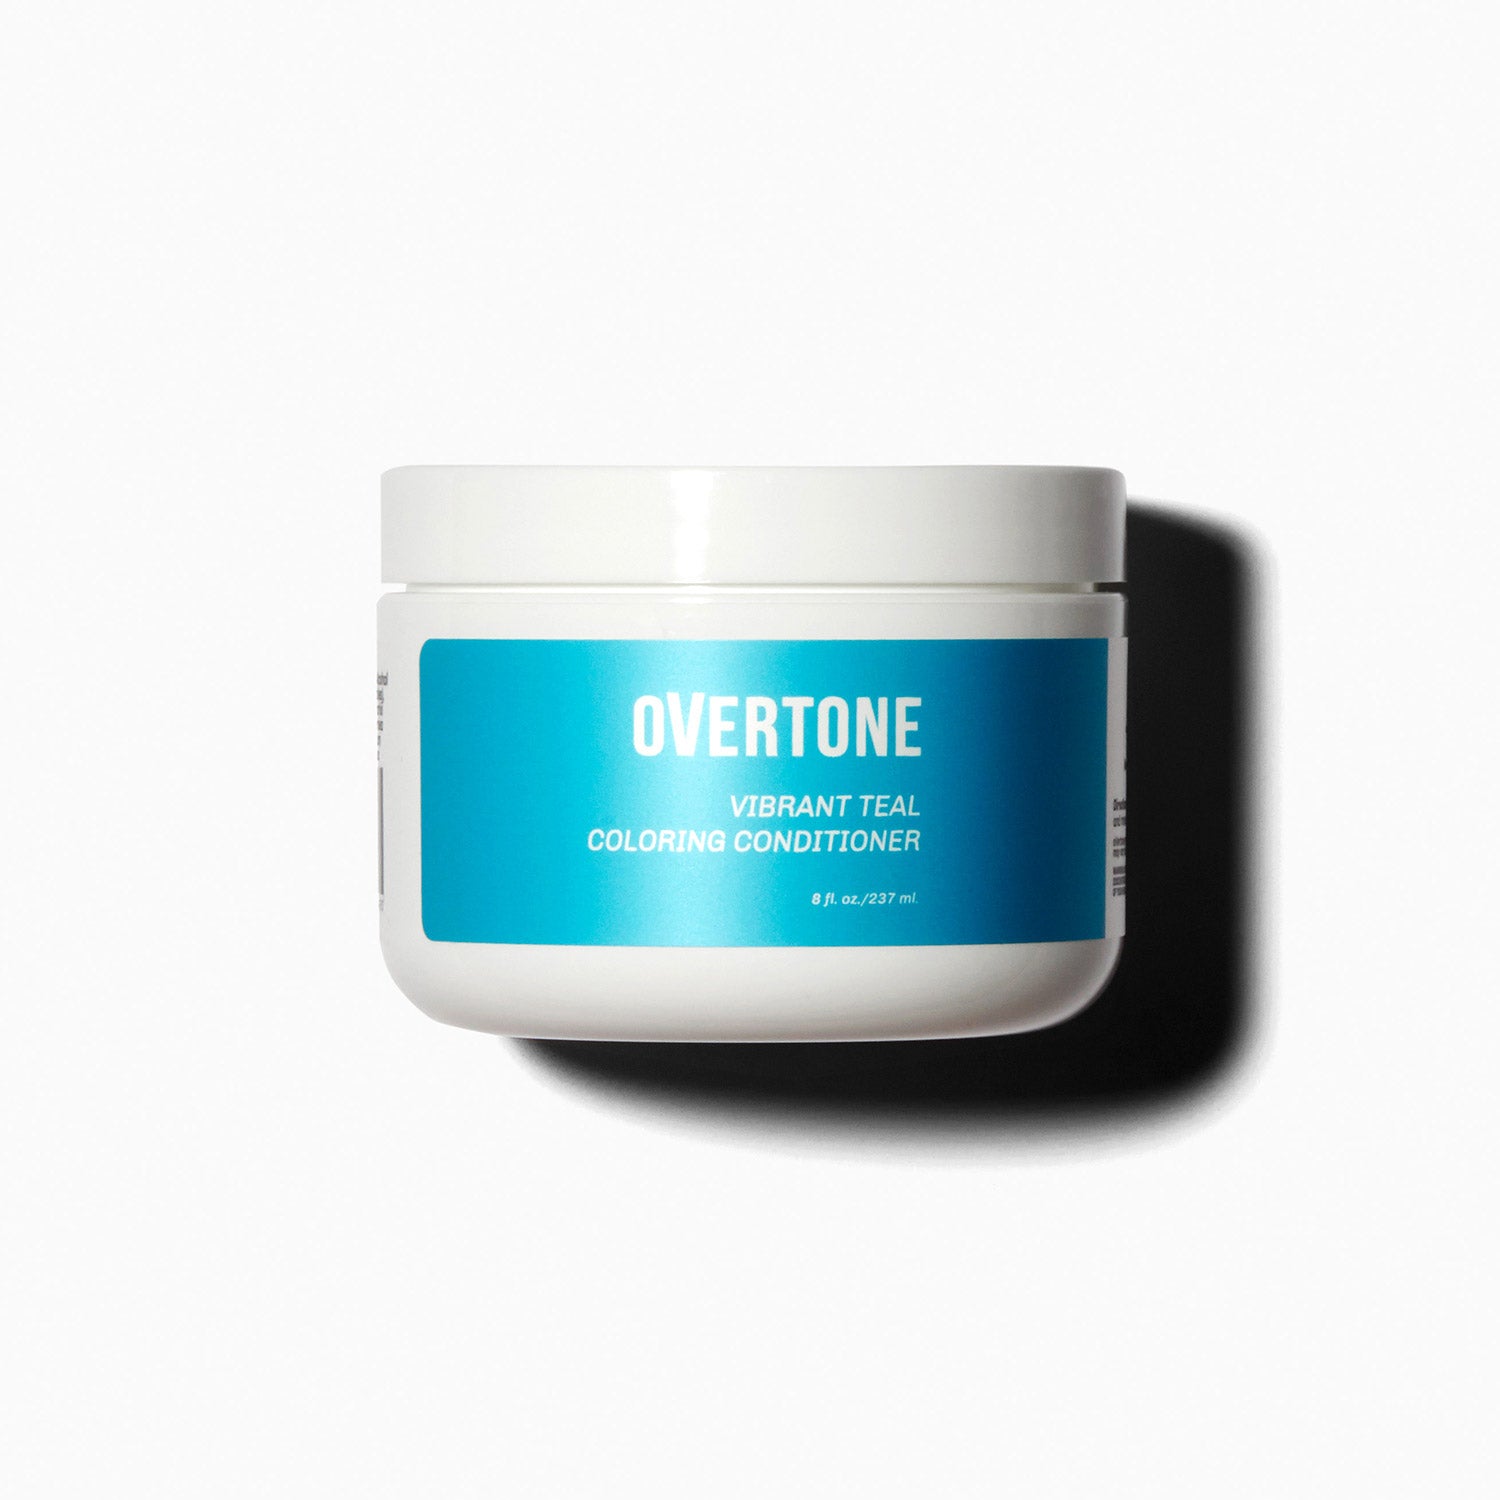 oVertone Vibrant Teal Coloring Conditioner